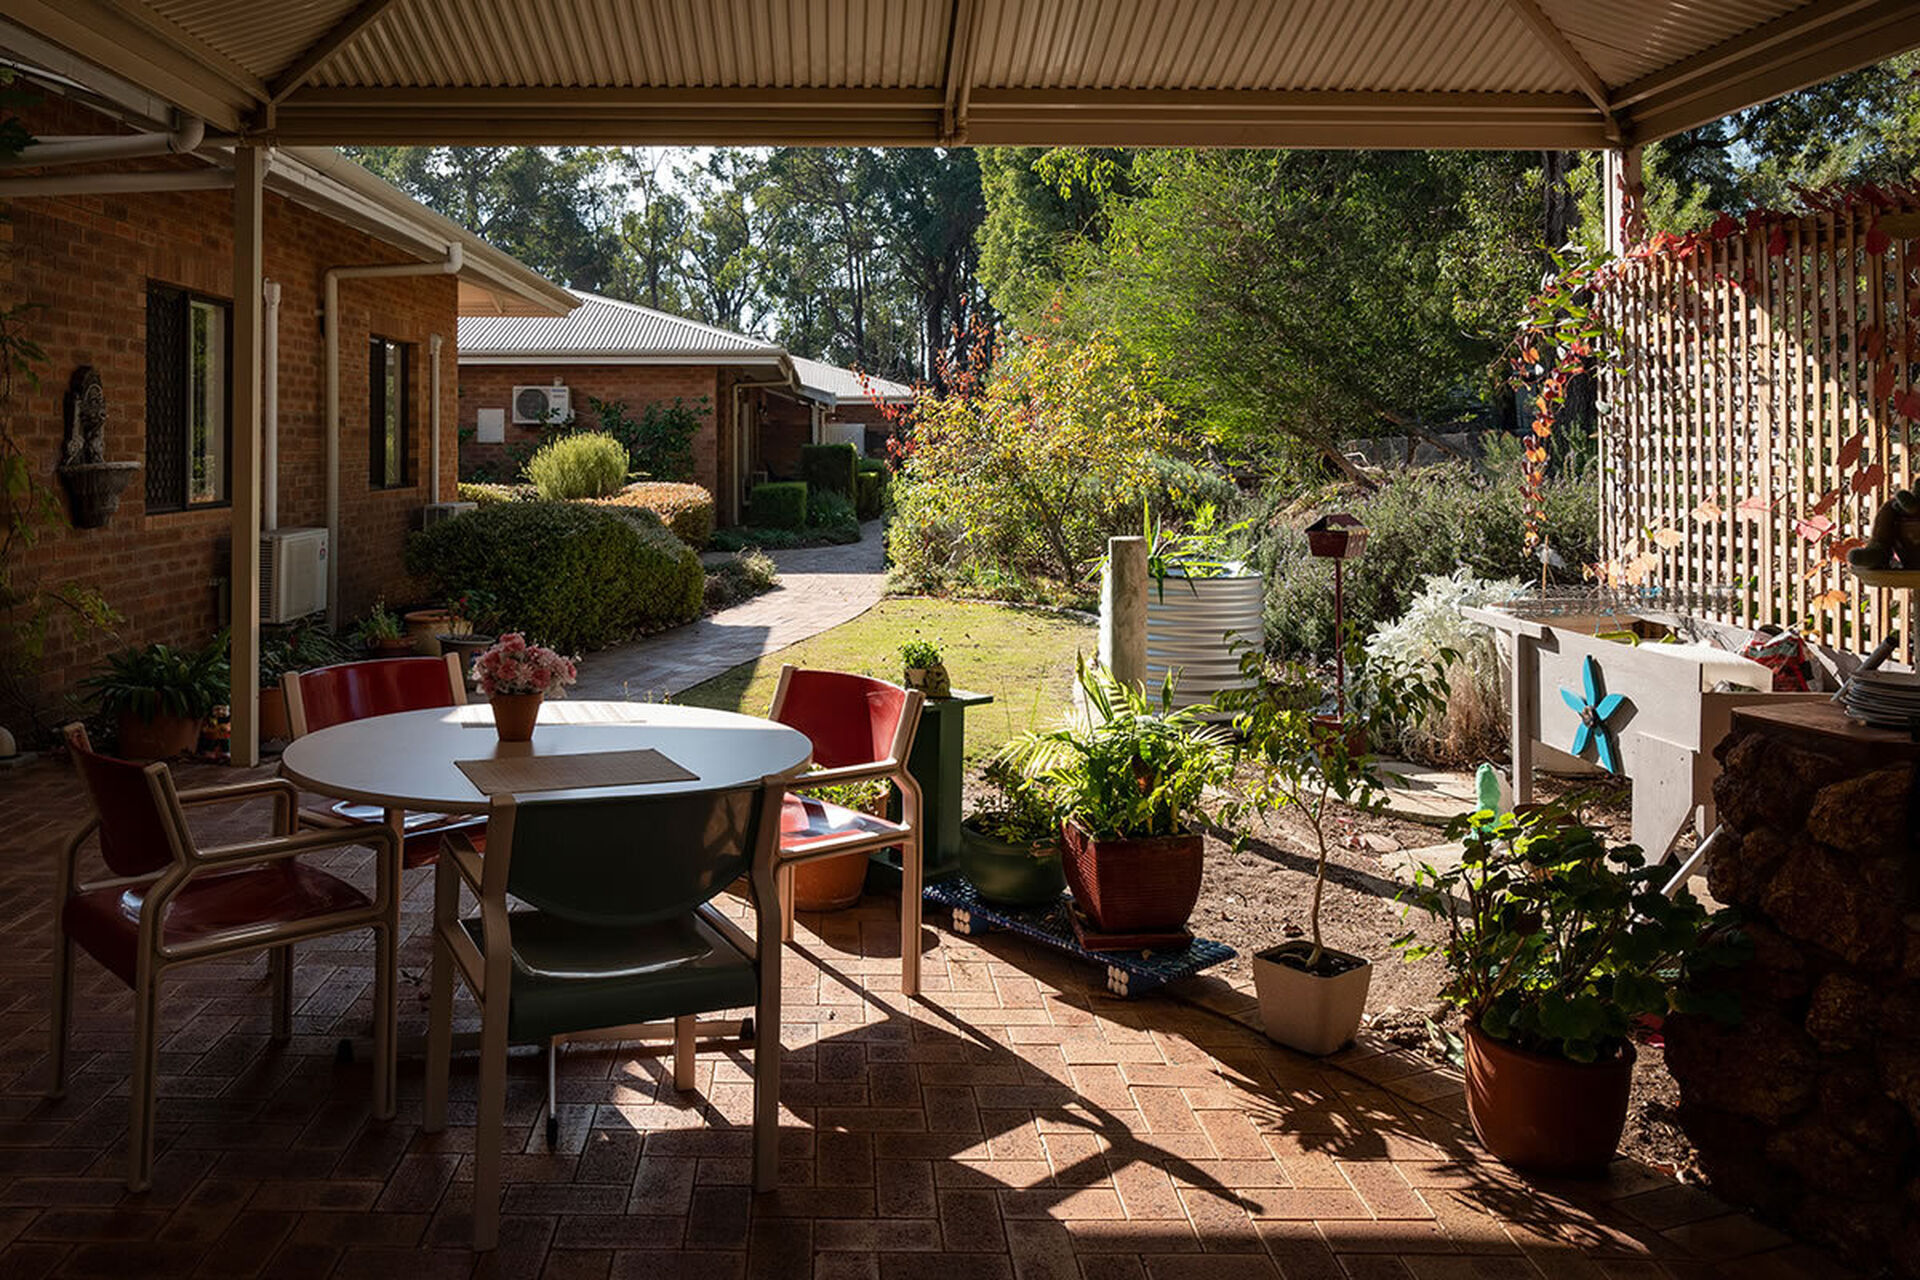 modern garden and outdoor sitting area for nursing home residents to enjoy at baptistcare yallambee aged care home in mundaring wa